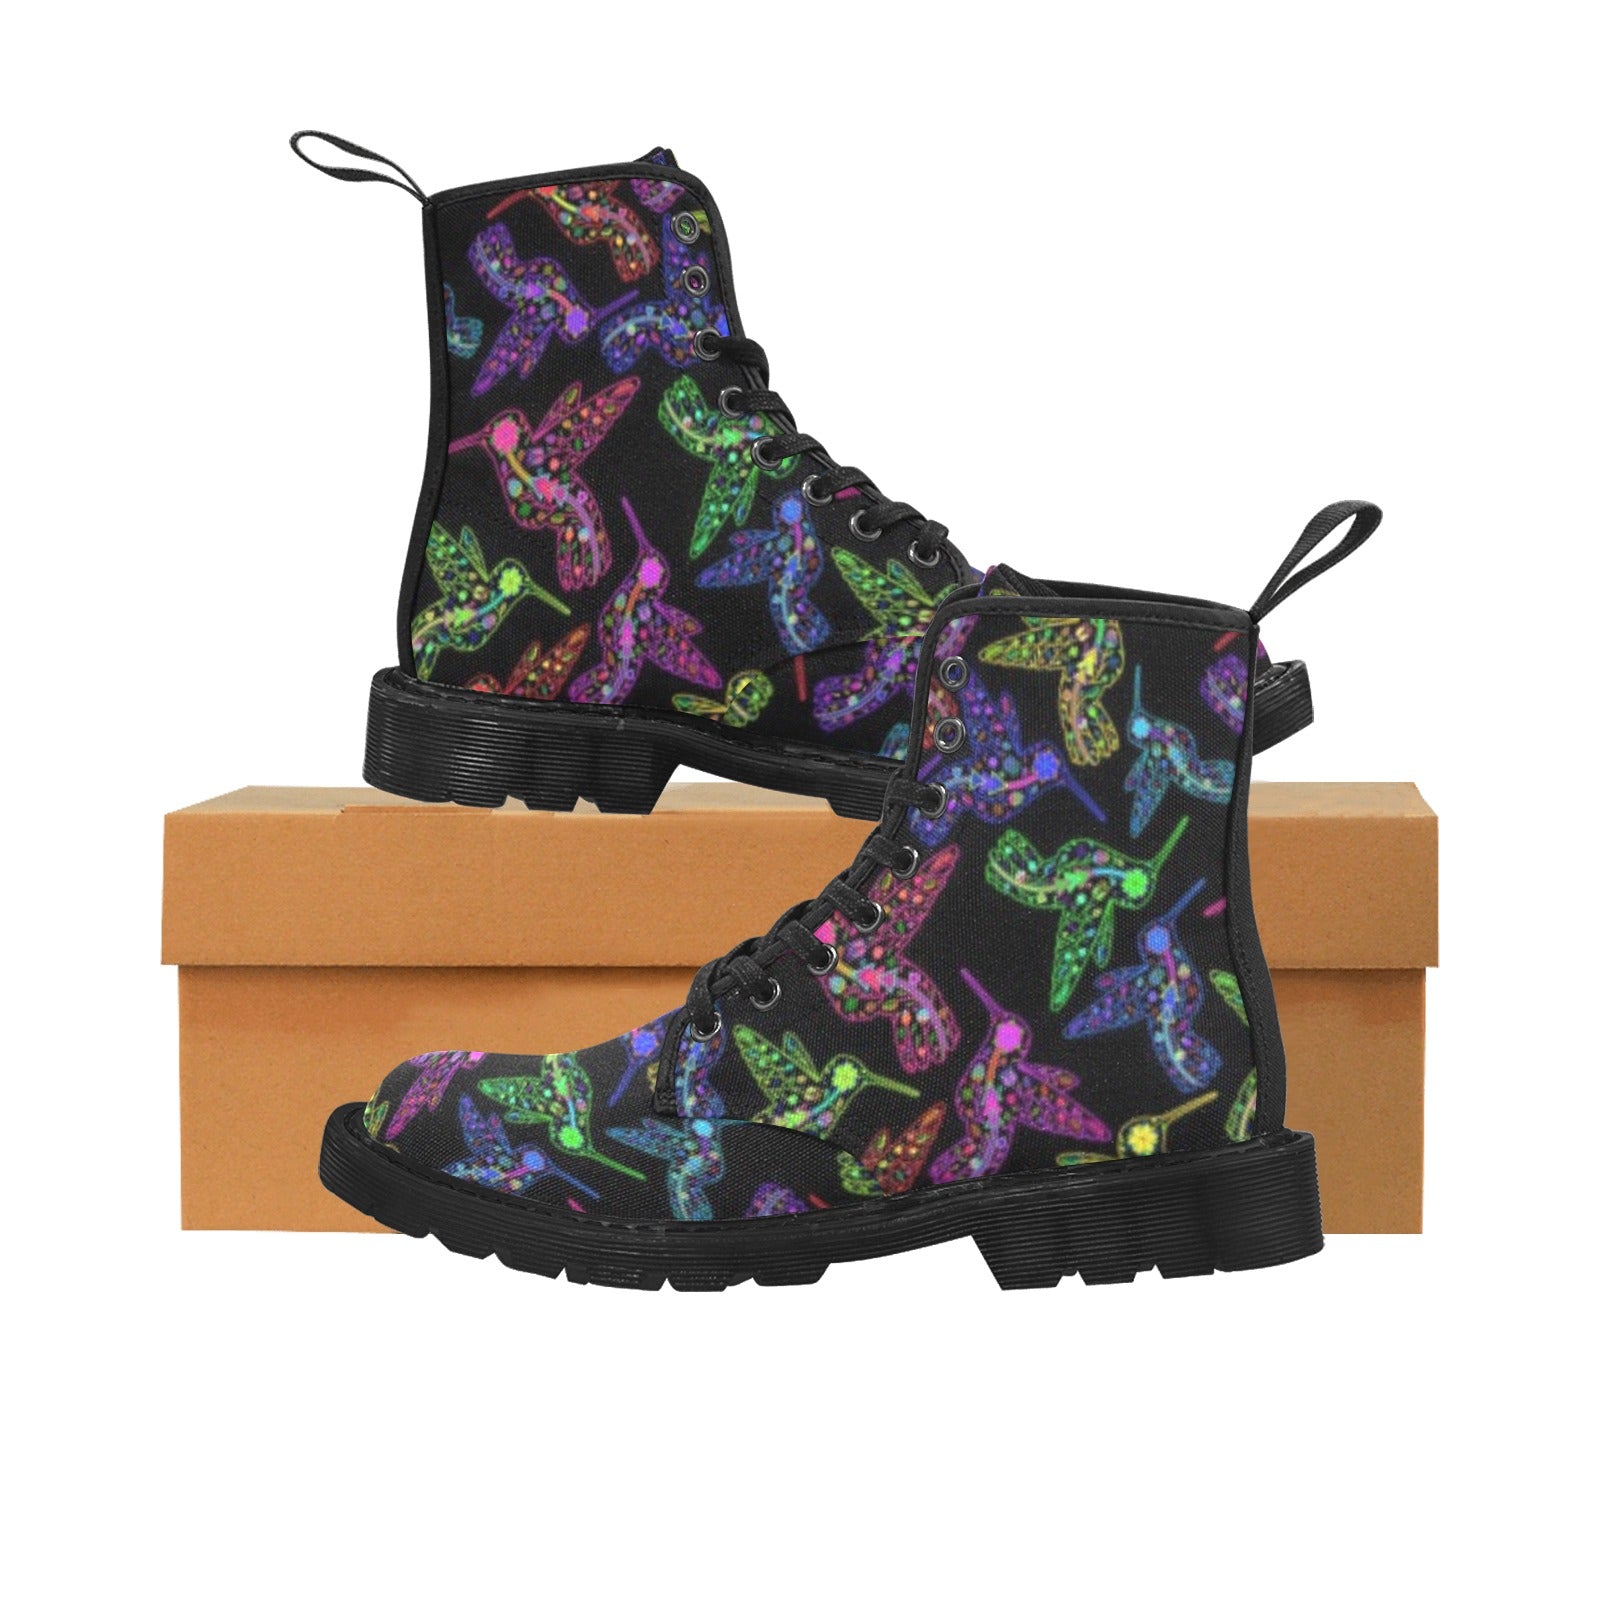 Neon Floral Hummingbirds Boots for Women (Black)